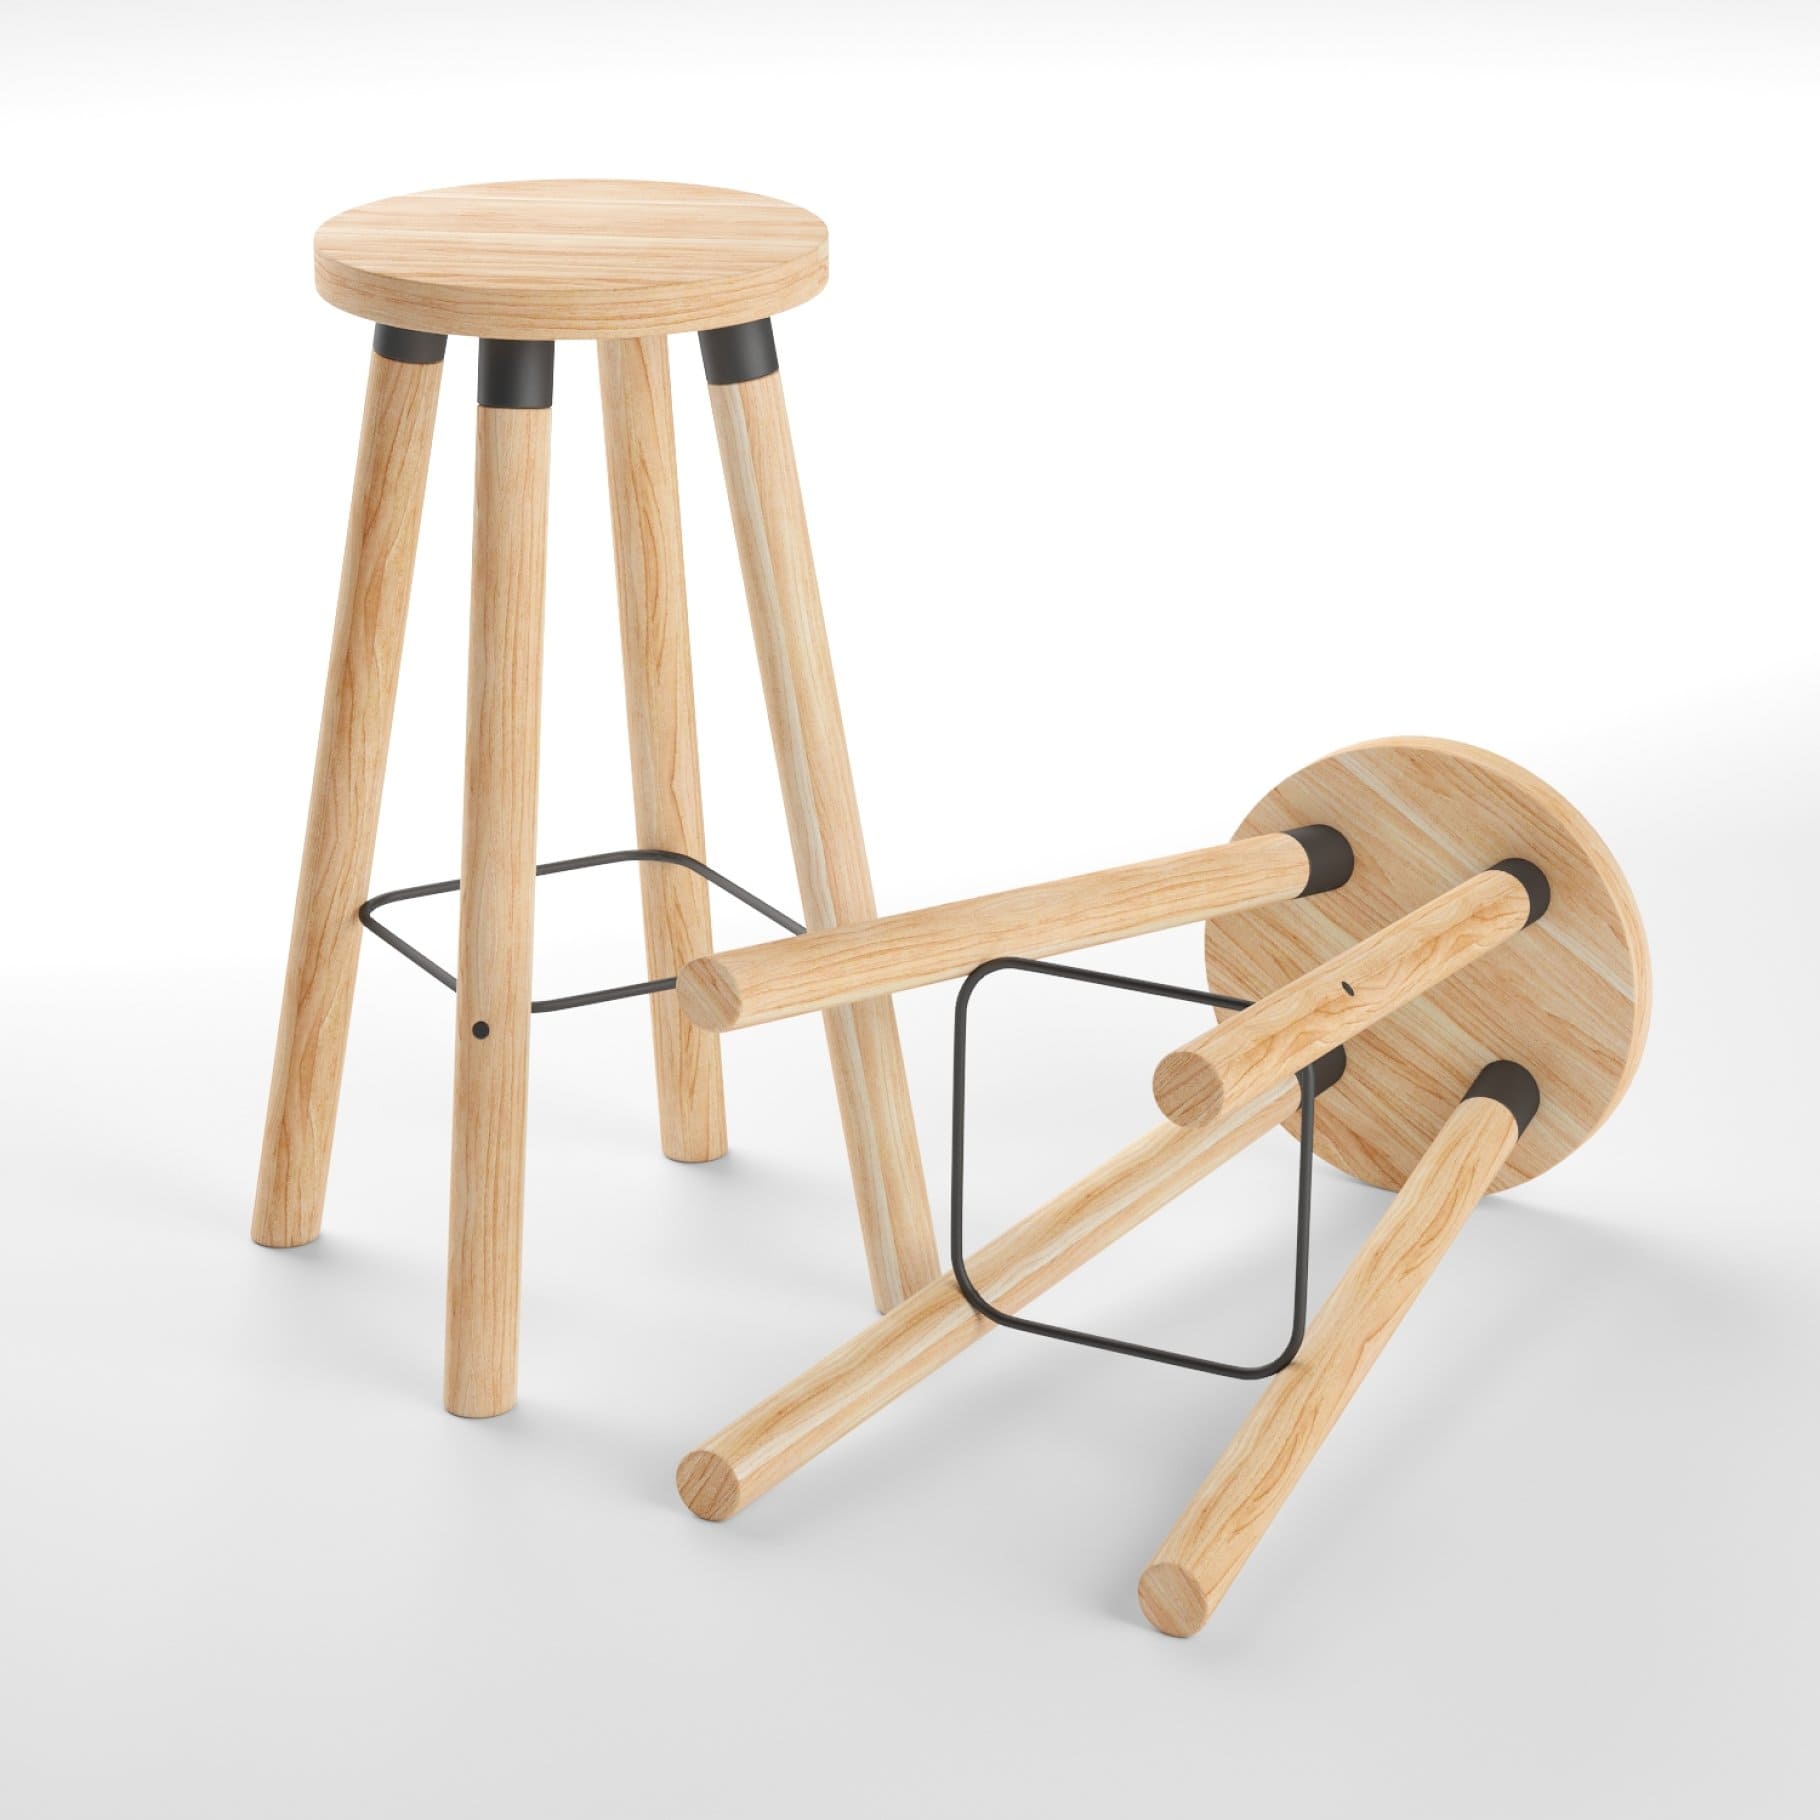 One Partridge Bar Stool Design By Them stands and the other lies.